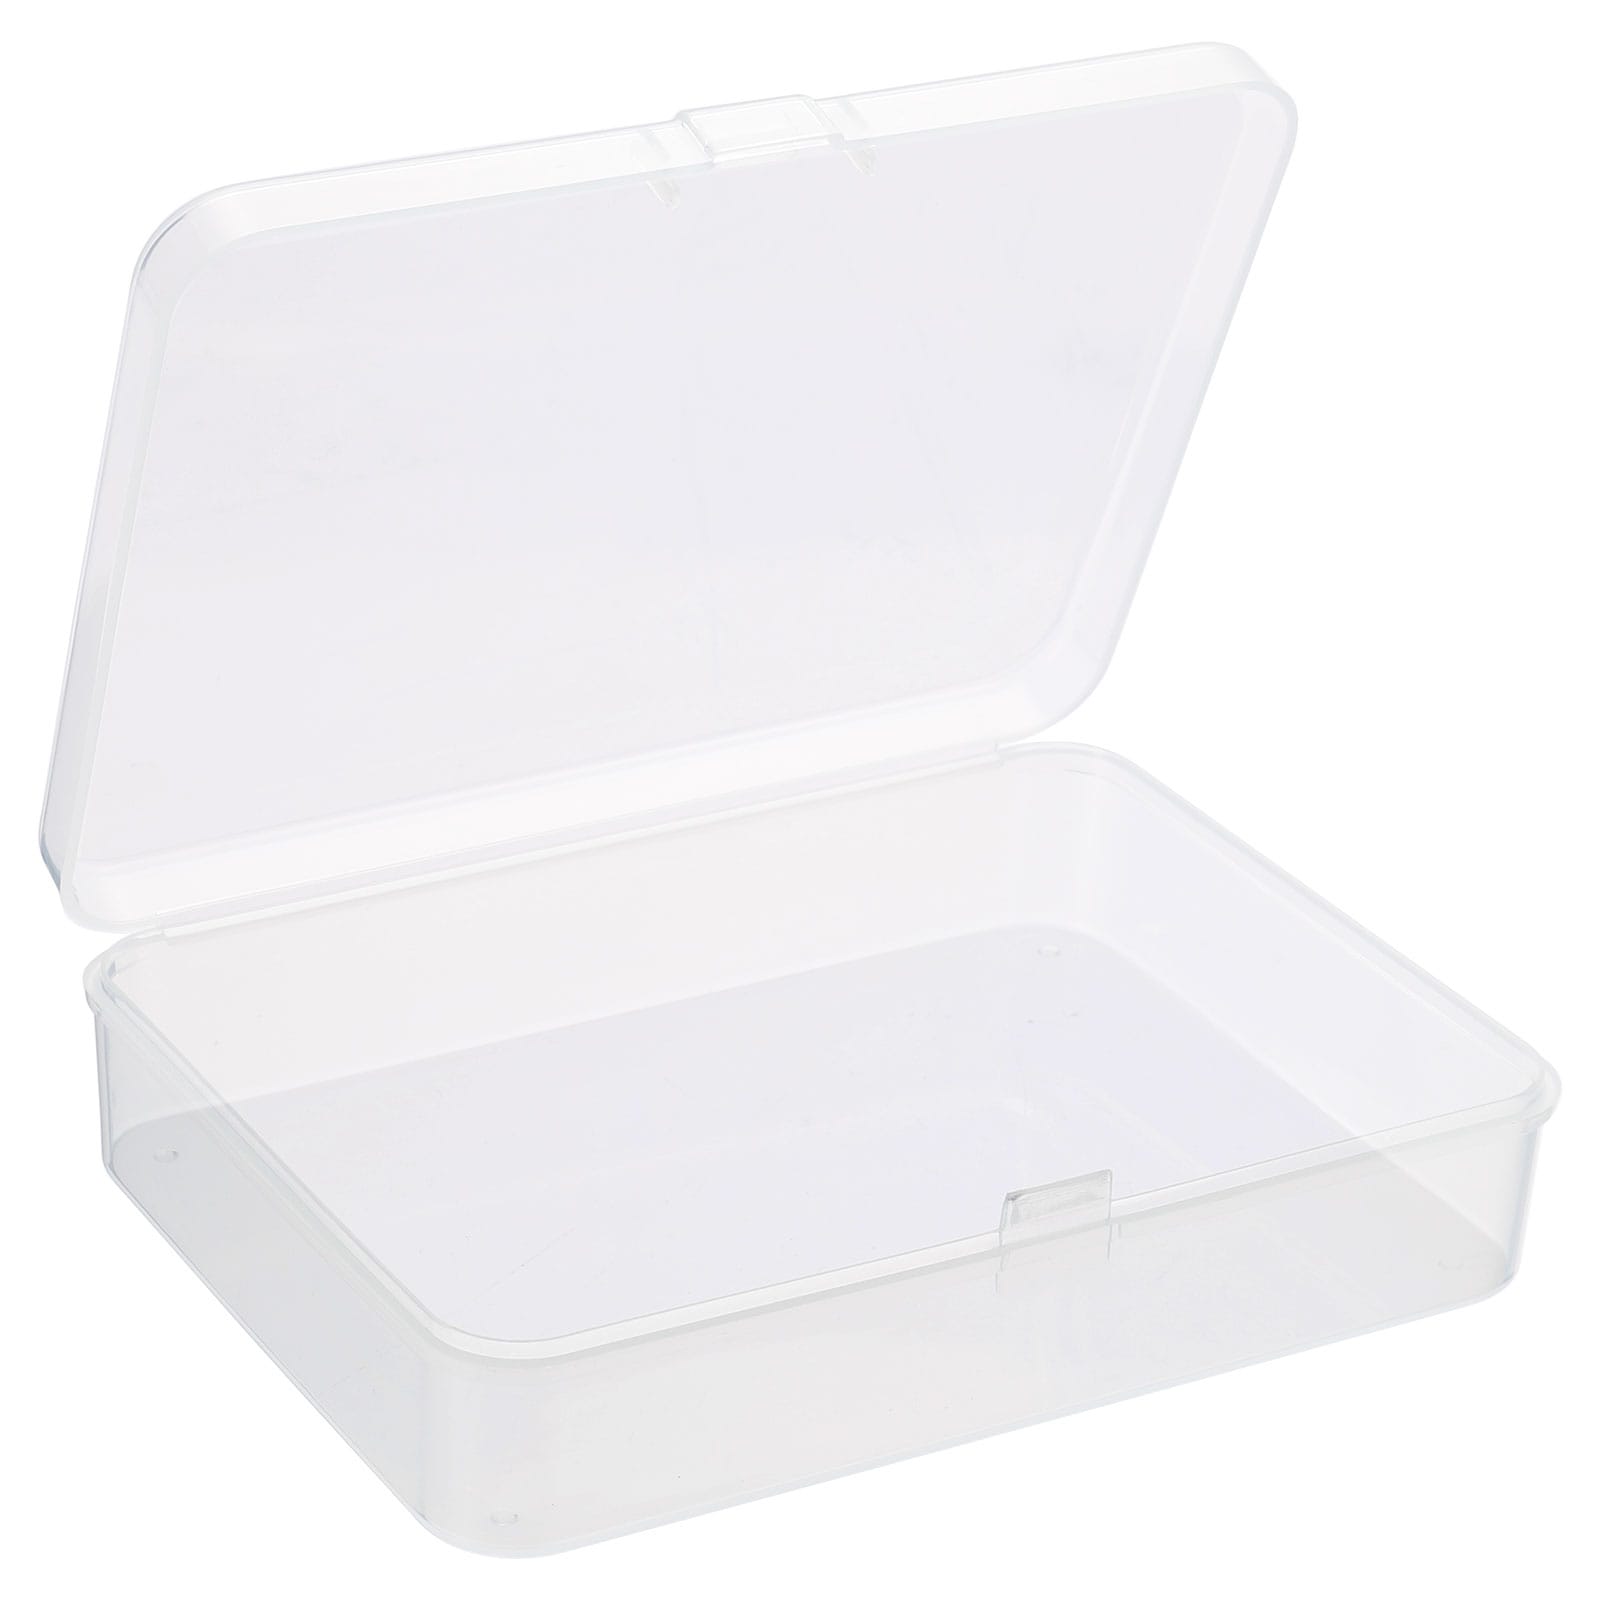 Sorbus Organizer Bins, with lids & Removable Compartments, Kitchen